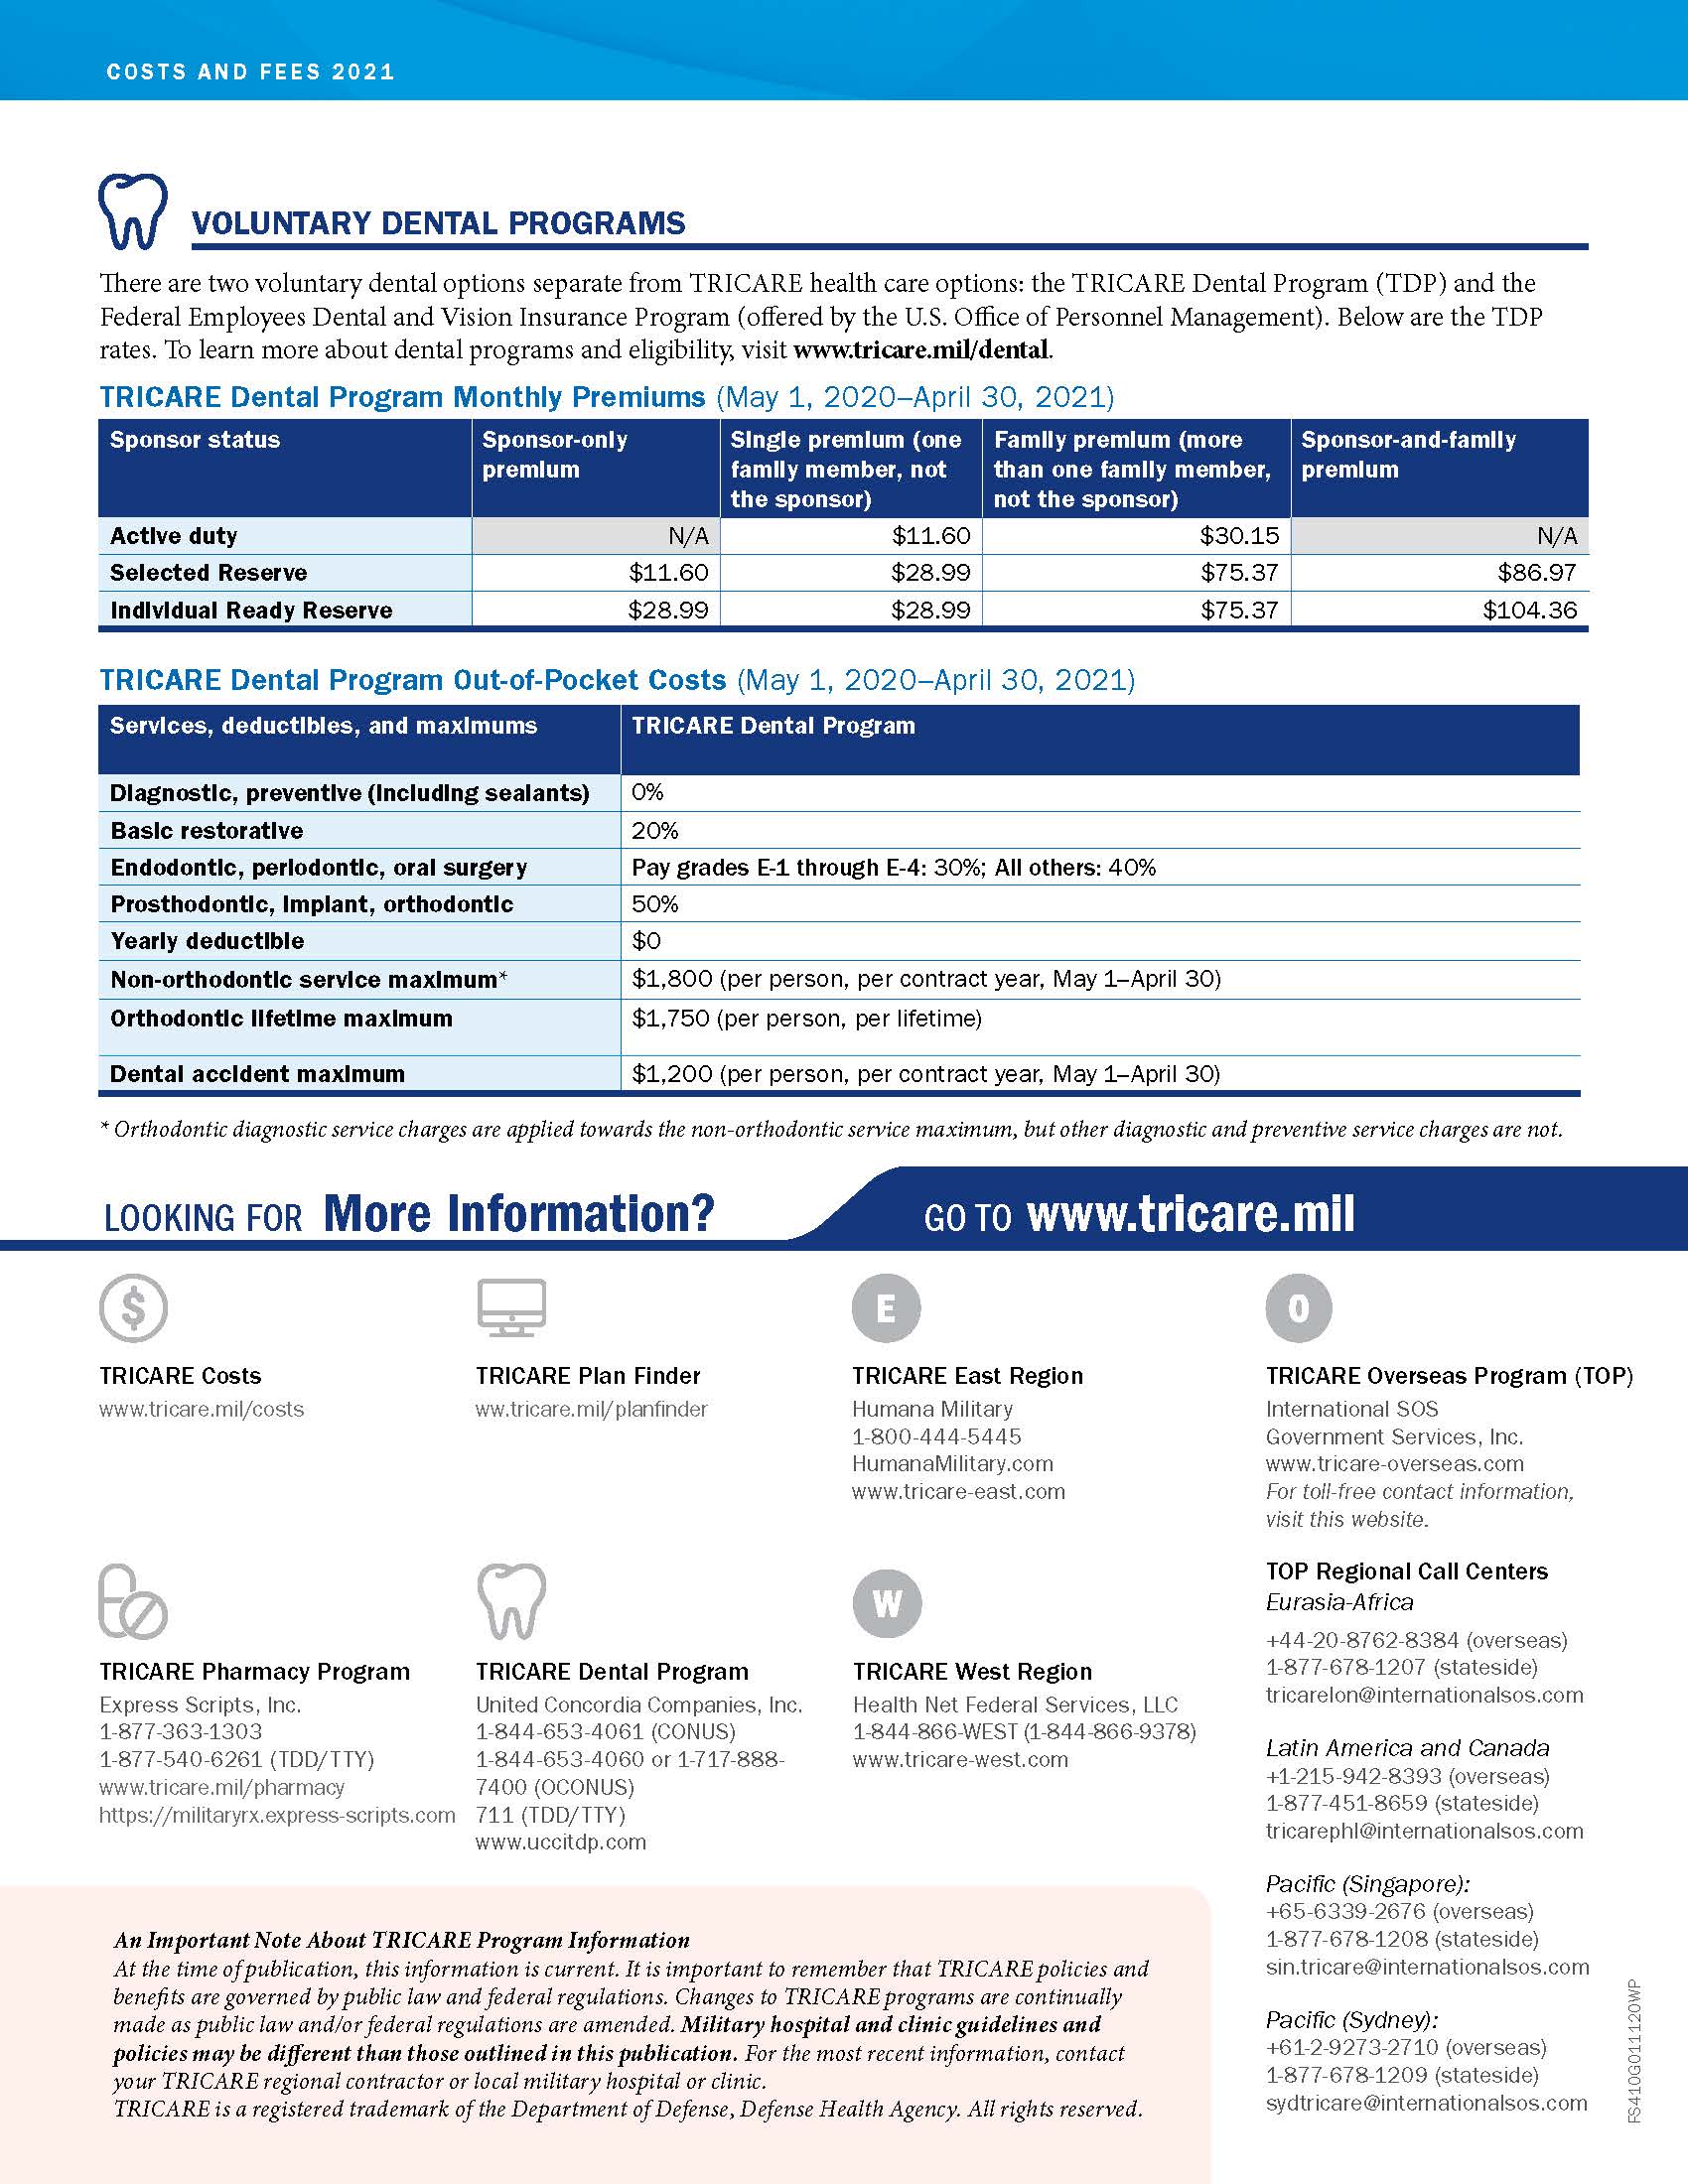 TRICARE Costs and Fees 2021